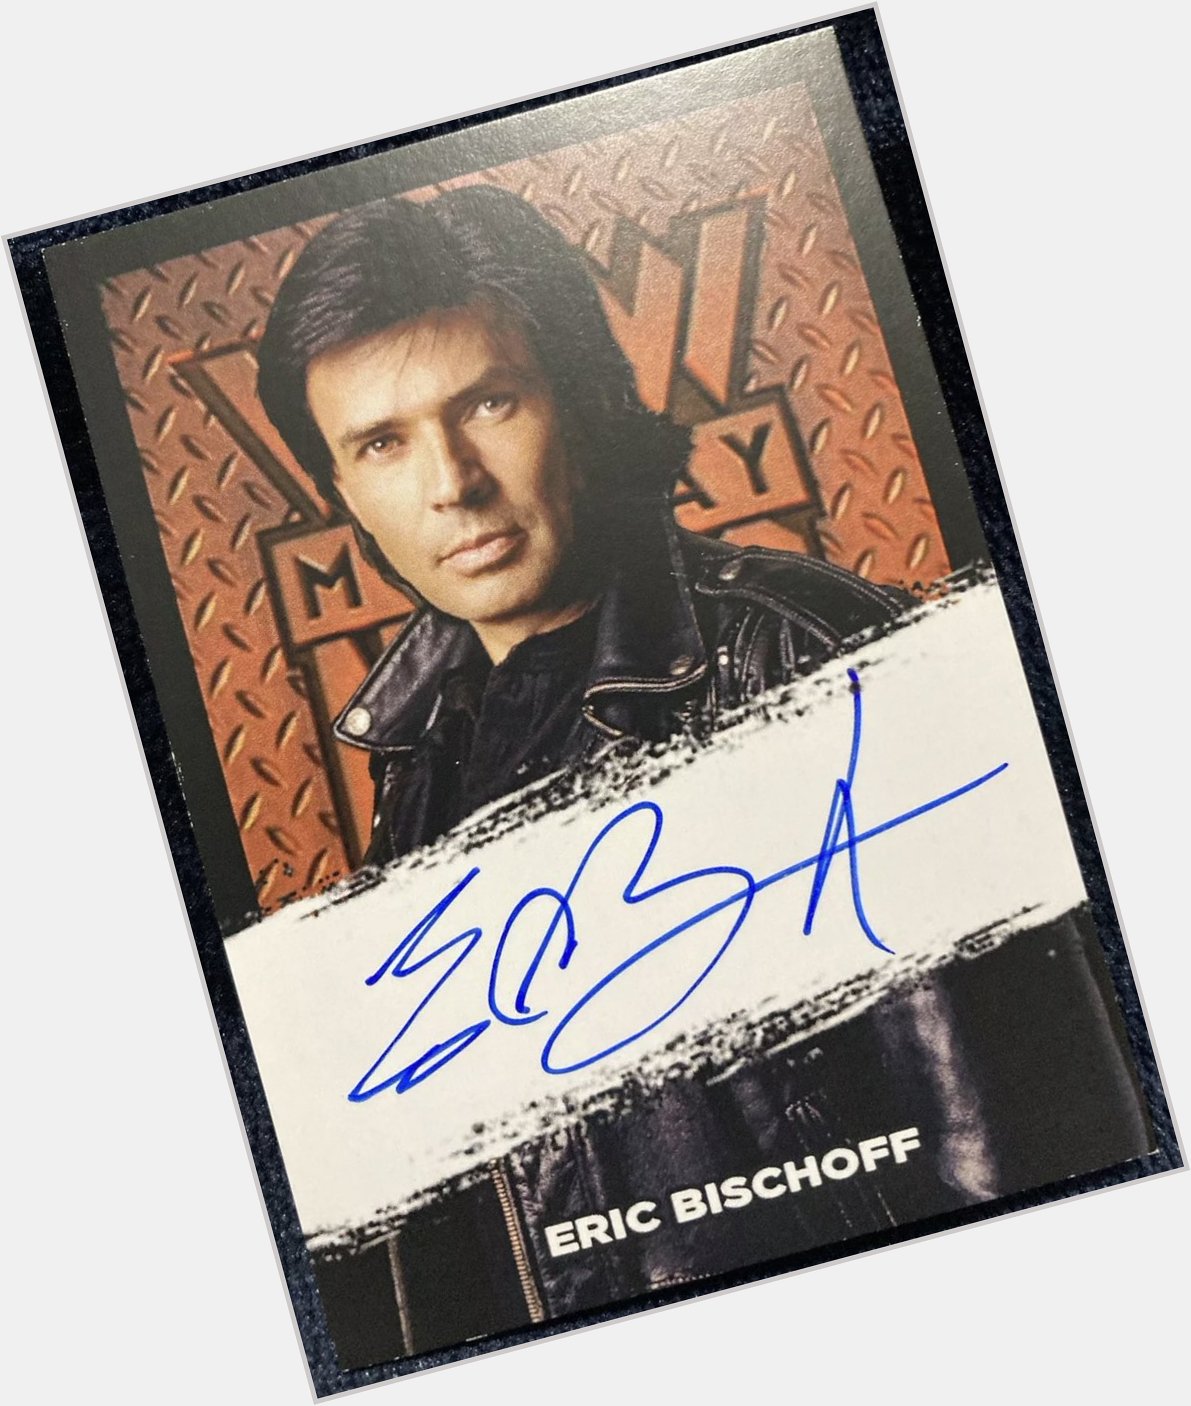 Happy Birthday to the great Eric Bischoff!
Pick up his autograph trading card for $25 each today 